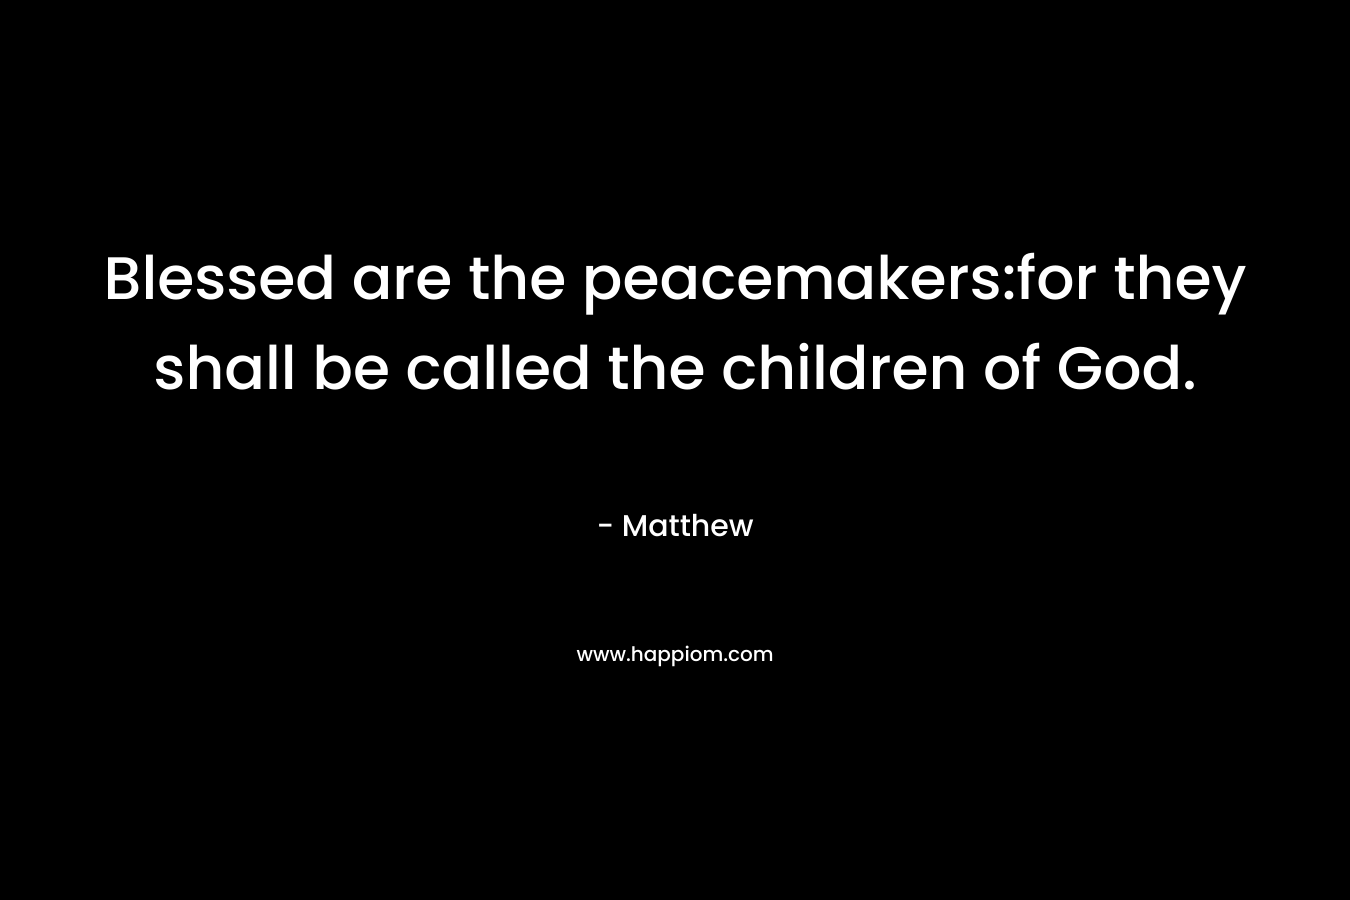 Blessed are the peacemakers:for they shall be called the children of God.